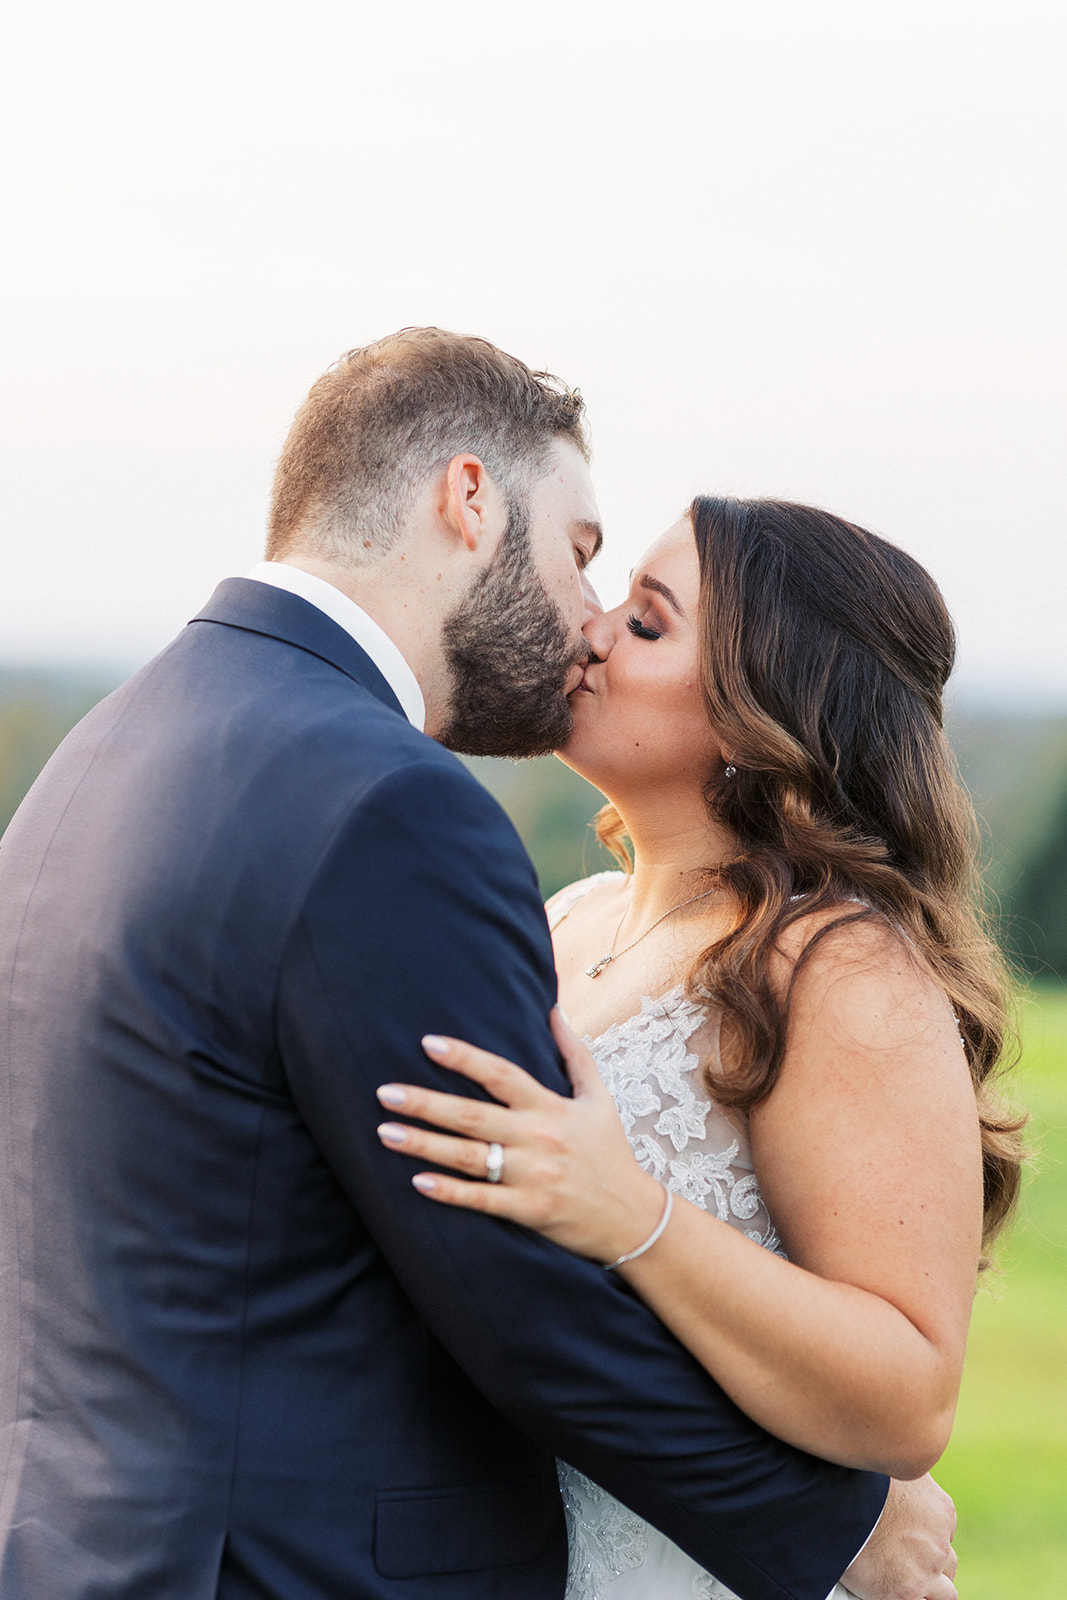 Newlyweds kiss while standing in a grassy lawn at sunset at The Mountain Lakes House Wedding